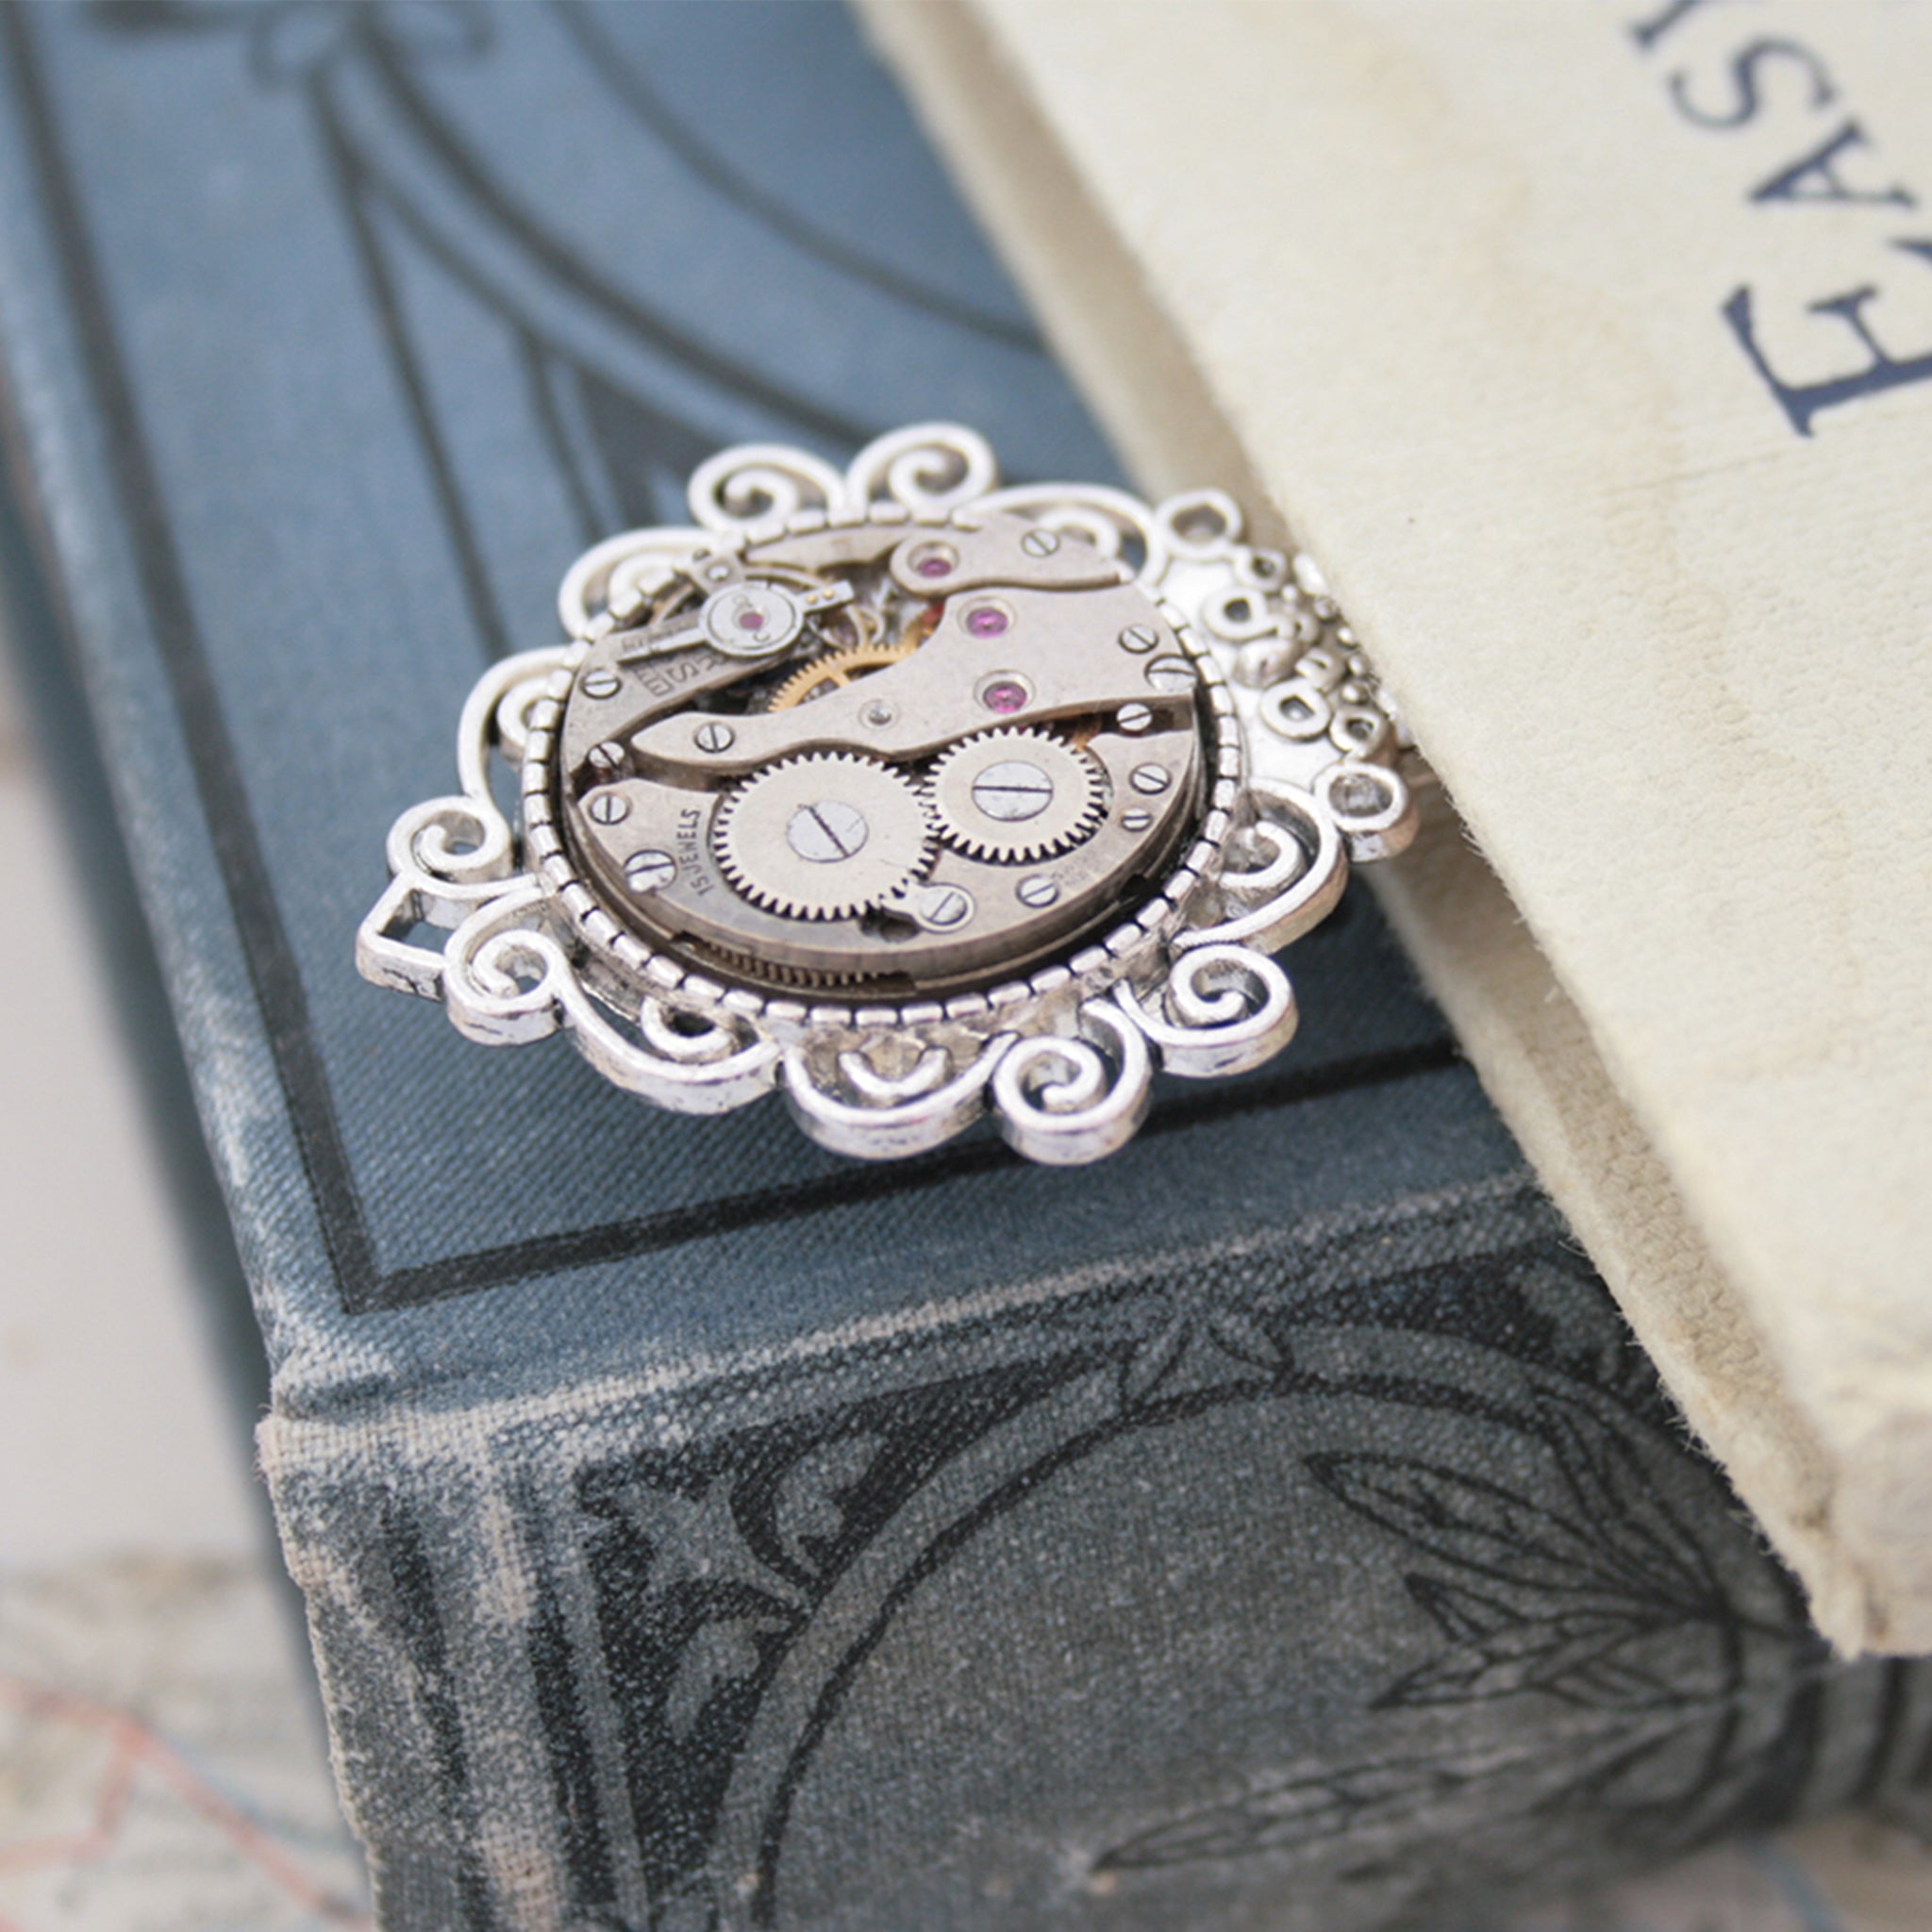 Steampunk Bookmarks for books made of real watch movement